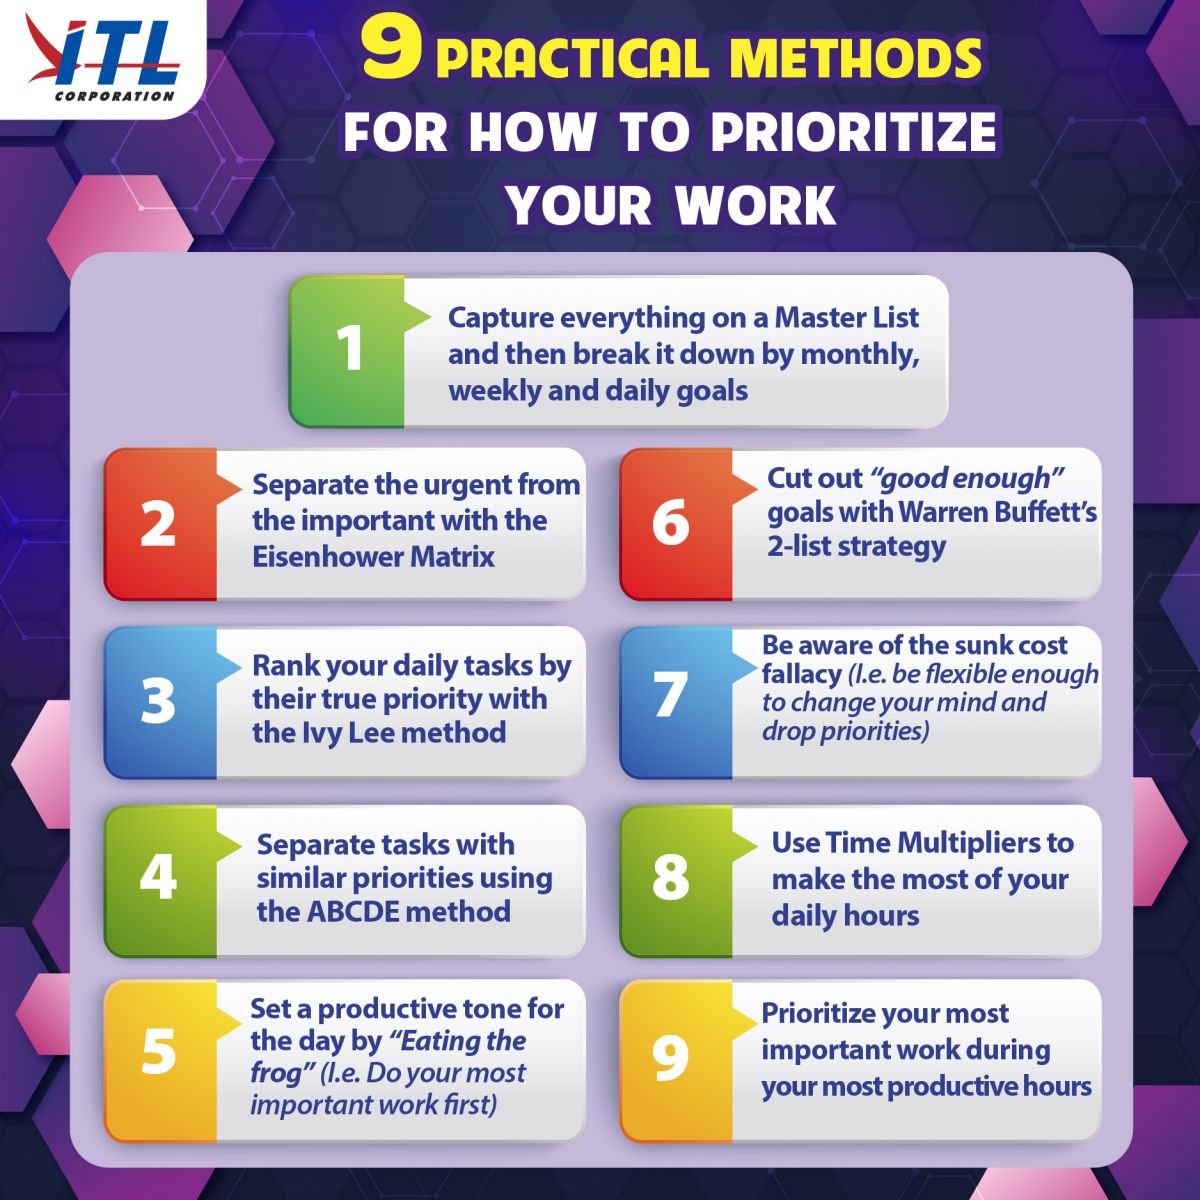 itl-corporation-9-practical-methods-for-how-to-prioritize-your-work